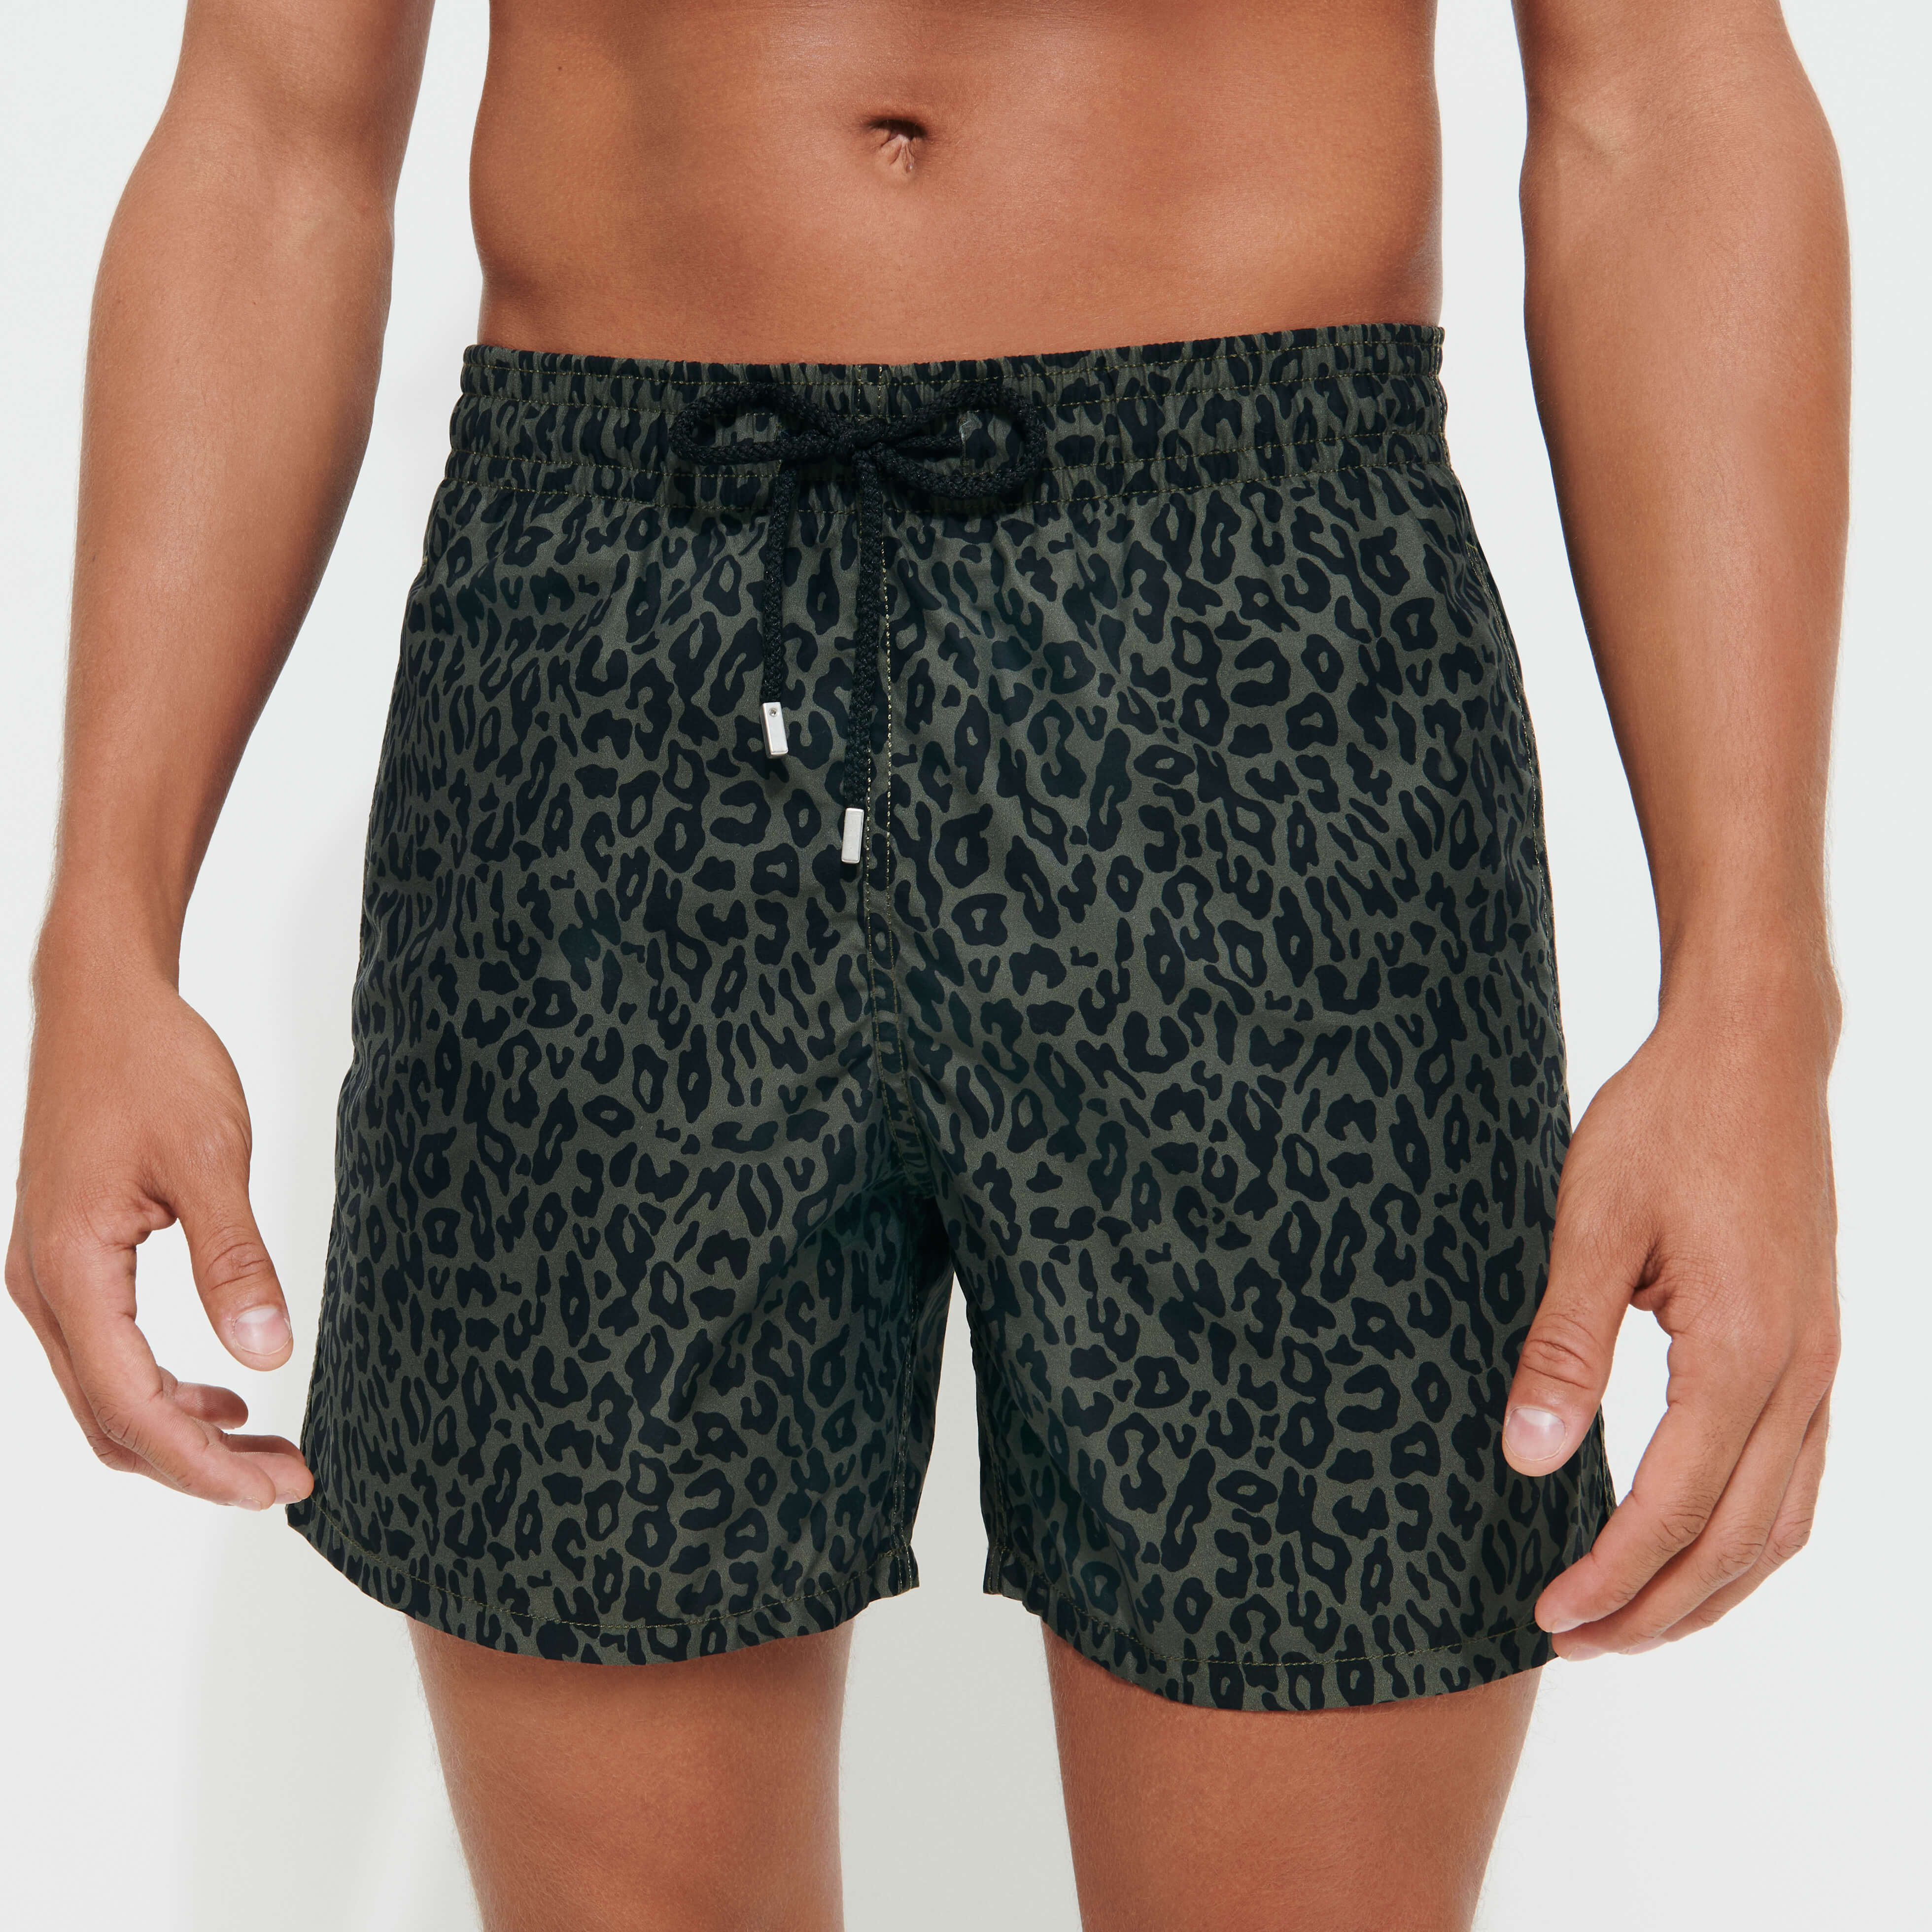 Palm Angels X Vilebrequin 3d Logo Swim Trunks Blue And Brown